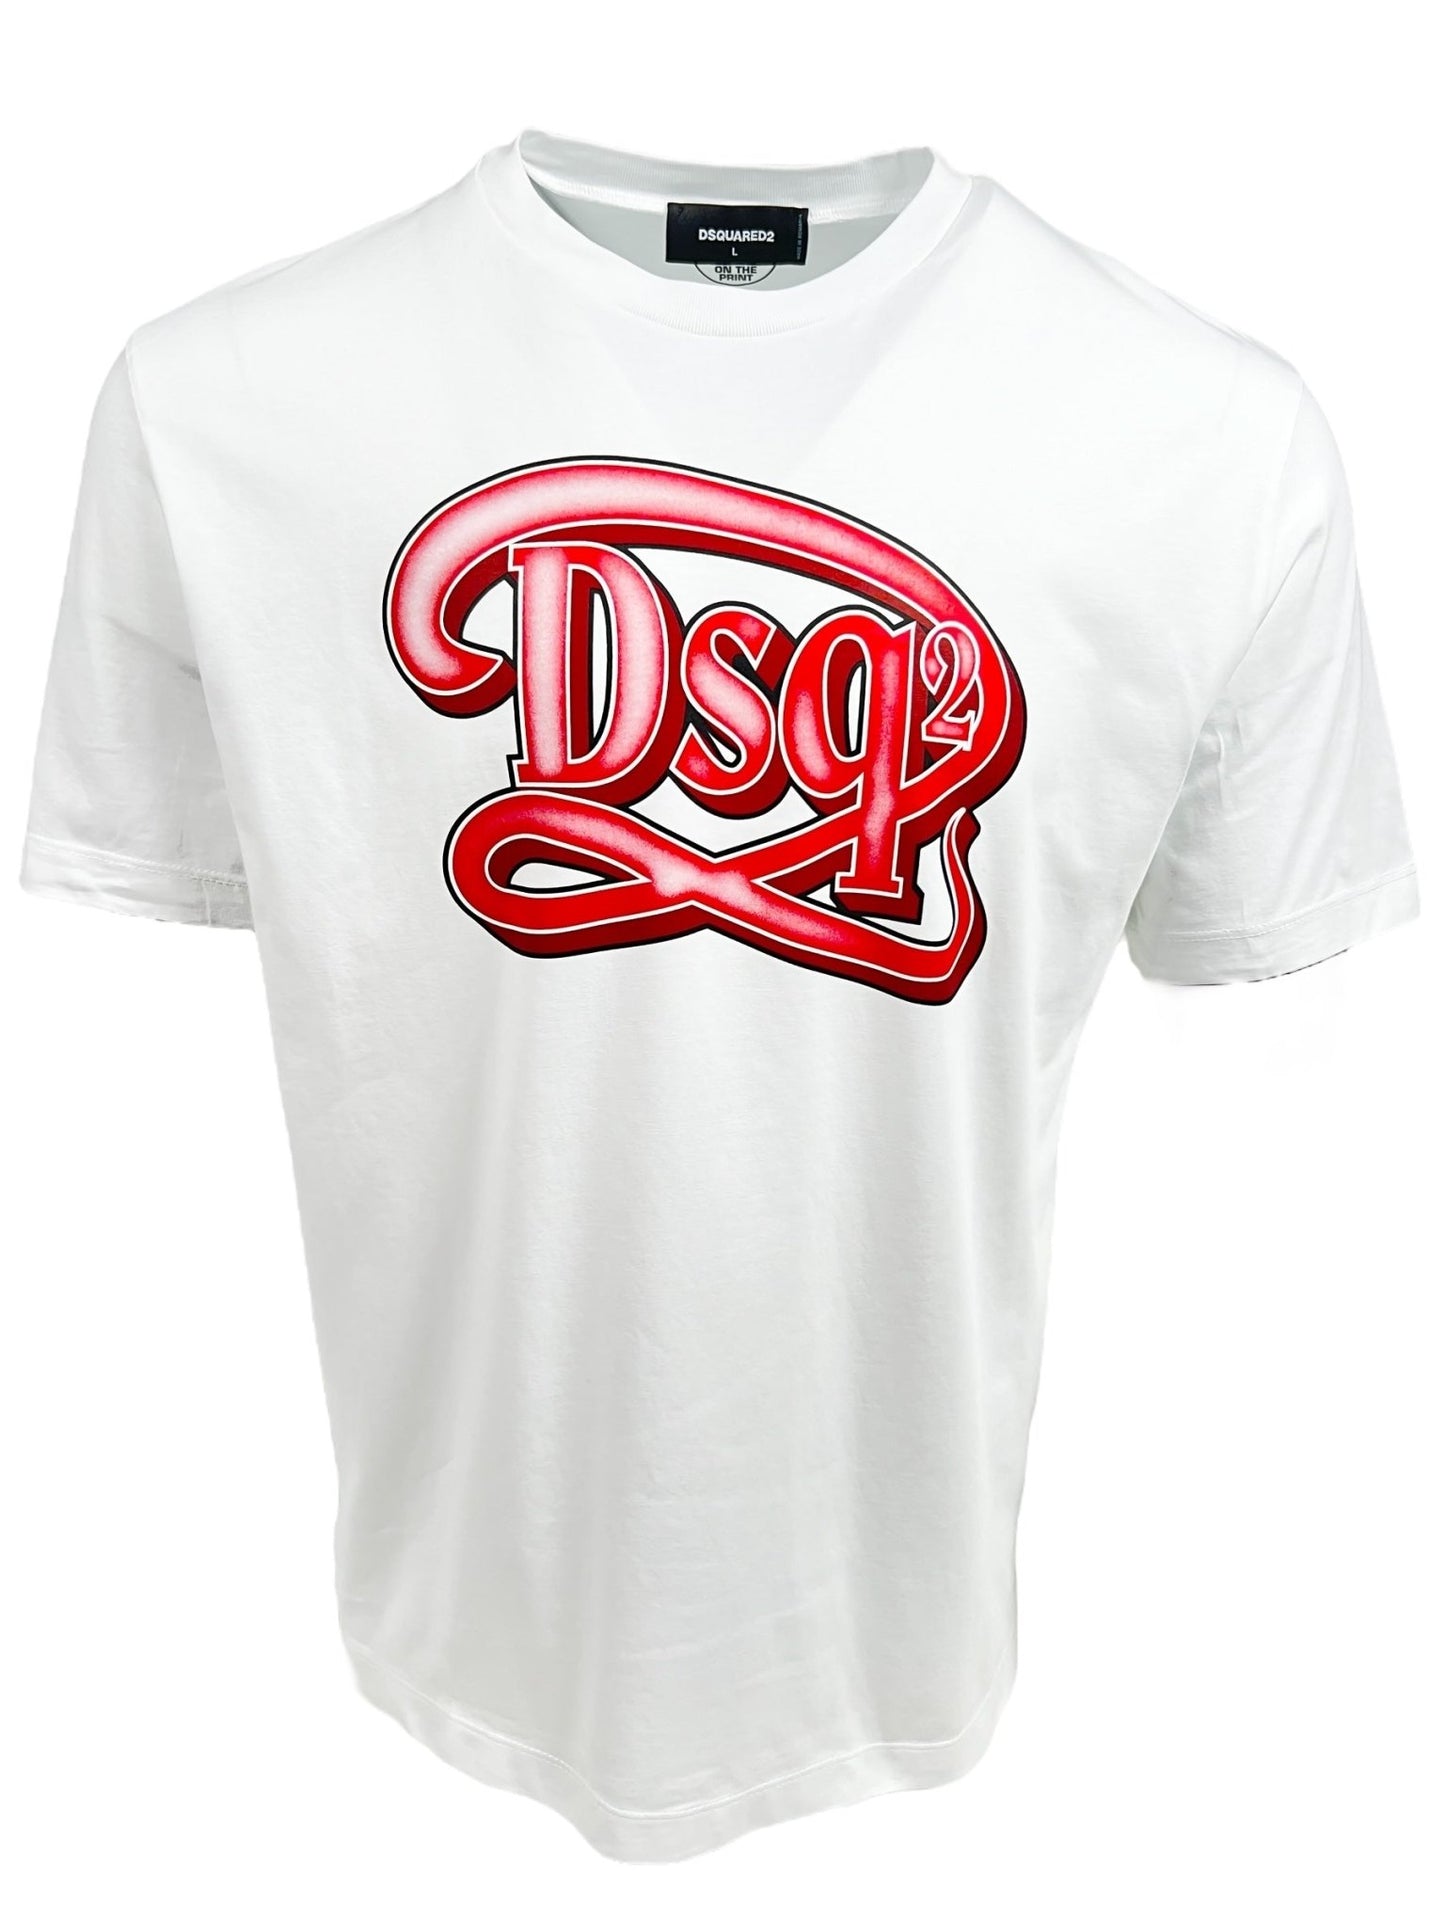 White DSQUARED2 S71GD1387 Regular Fit Tee featuring a prominent red and white logo reading "dsq2" in a swirling, stylized font, displayed on a plain background.